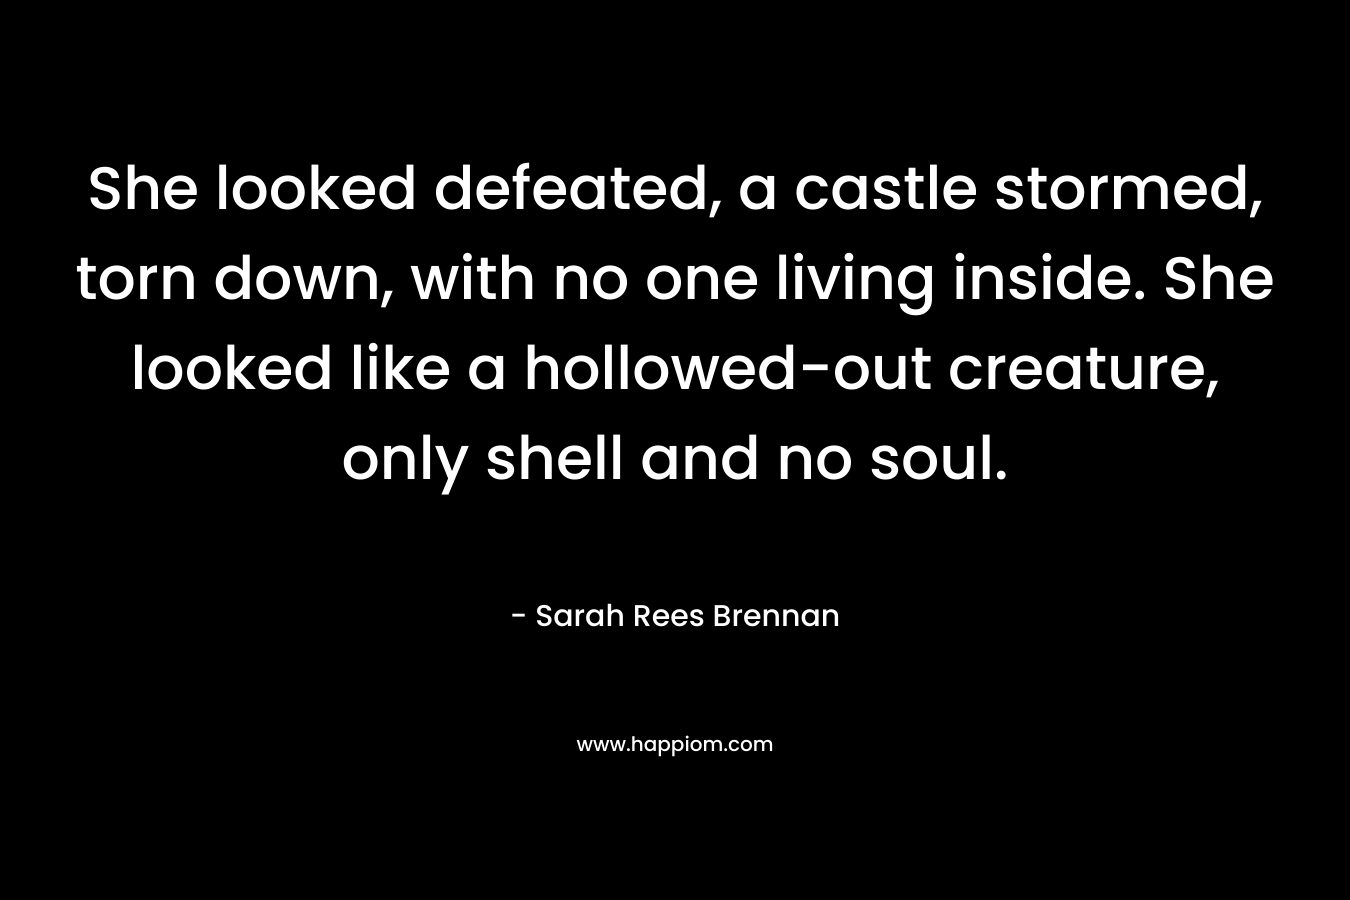 She looked defeated, a castle stormed, torn down, with no one living inside. She looked like a hollowed-out creature, only shell and no soul. – Sarah Rees Brennan